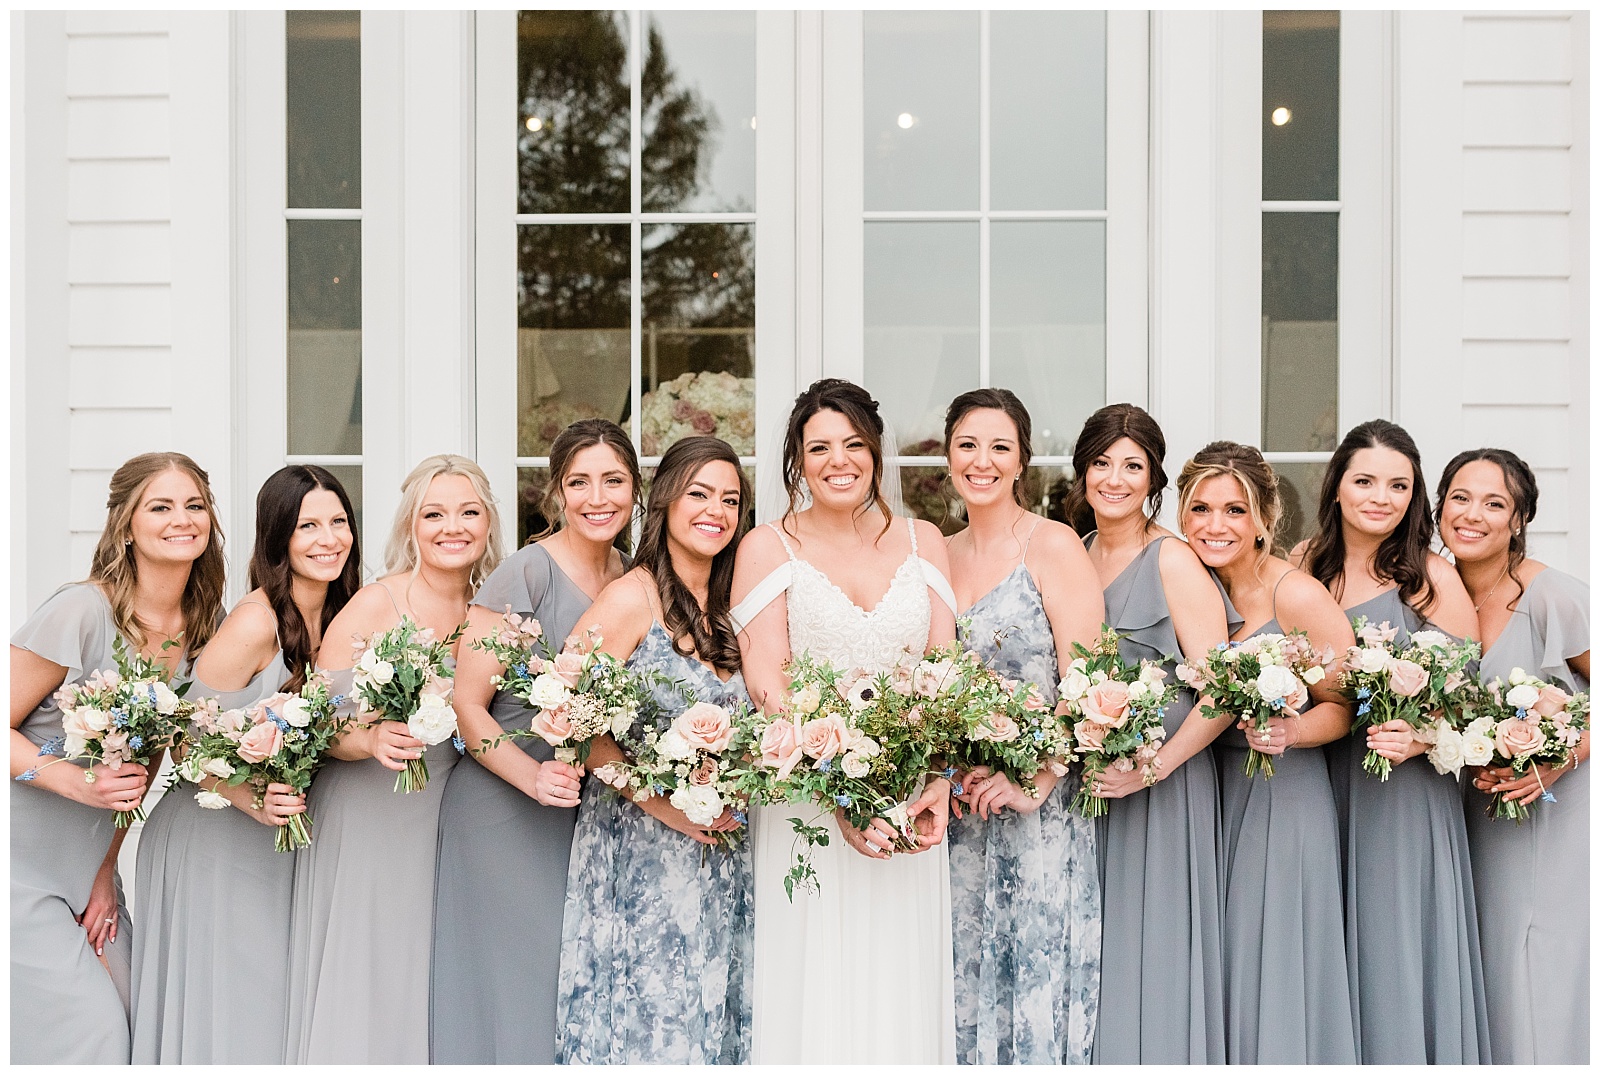 Bridesmaids wearing different shades of grey dresses hold their bouquets and smile.